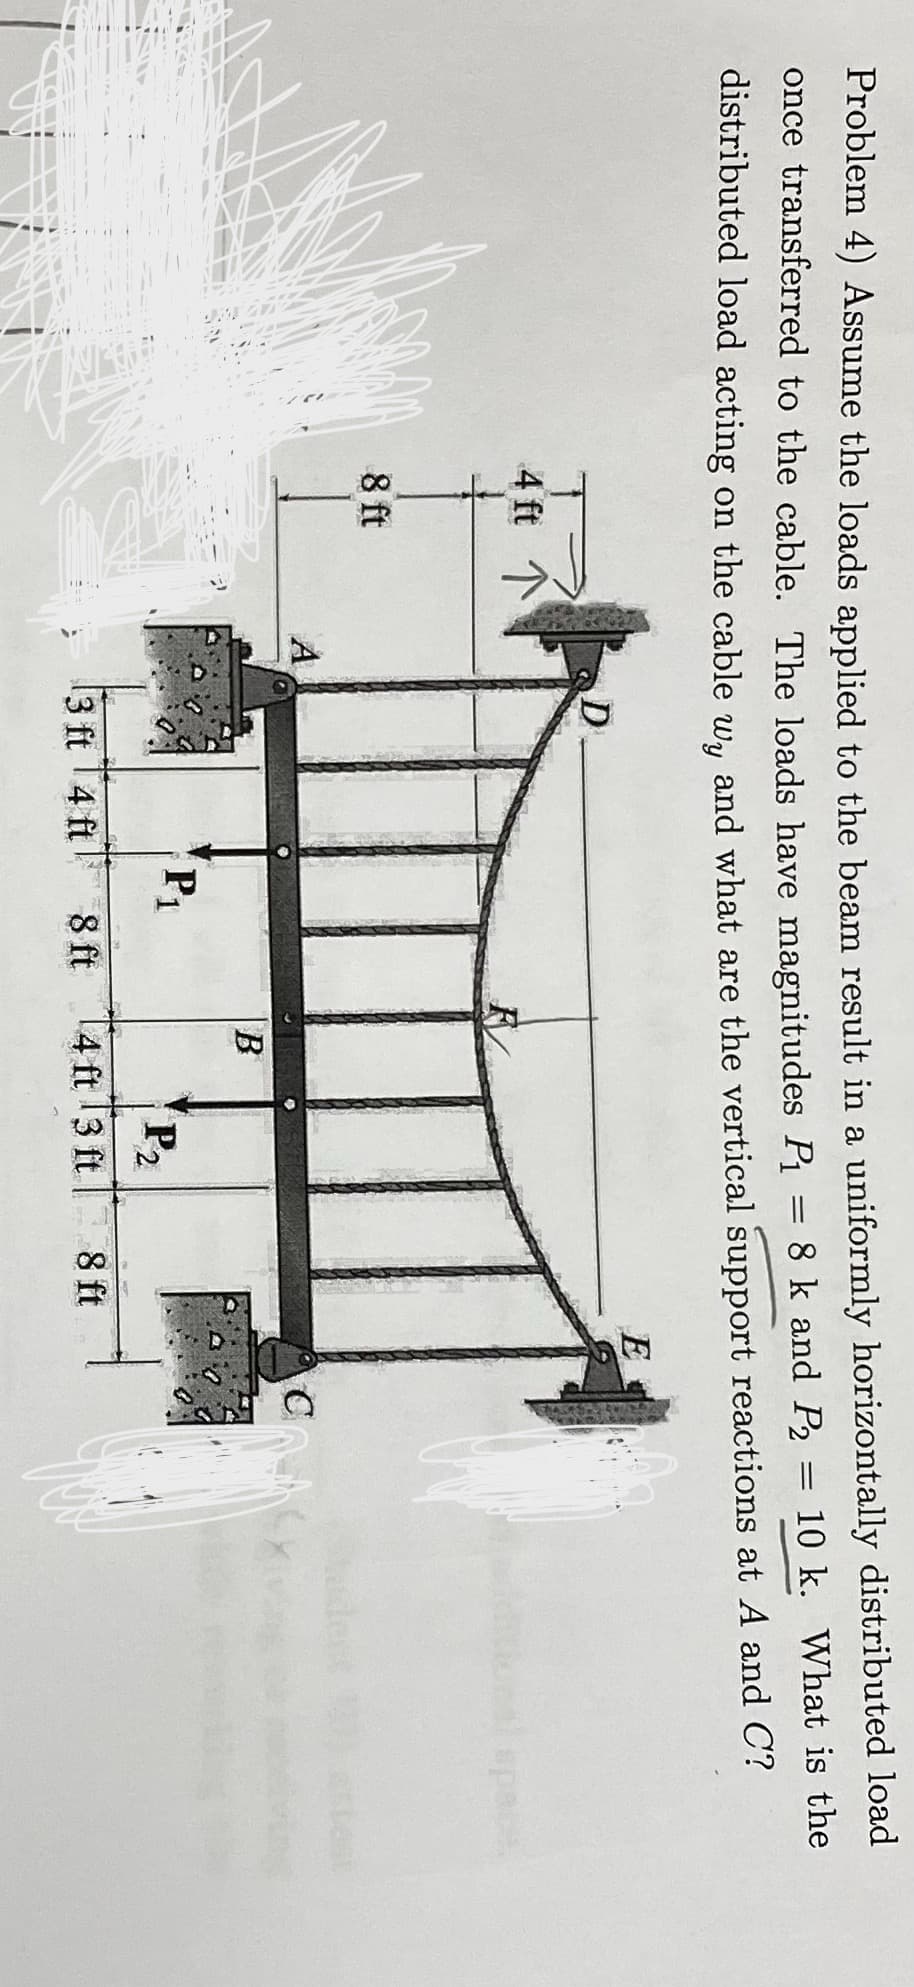 Problem 4) Assume the loads applied to the beam result in a uniformly horizontally distributed load
10 k. What is the
once transferred to the cable. The loads have magnitudes Pi = 8 k and P2
distributed load acting on the cable w, and what are the vertical support reactions at A and C?
E
4 ft
l space
8 ft
dest
A
B
P1
P2
3 ft 14 ft
8 ft
14 ft 3 ft
8 ft
